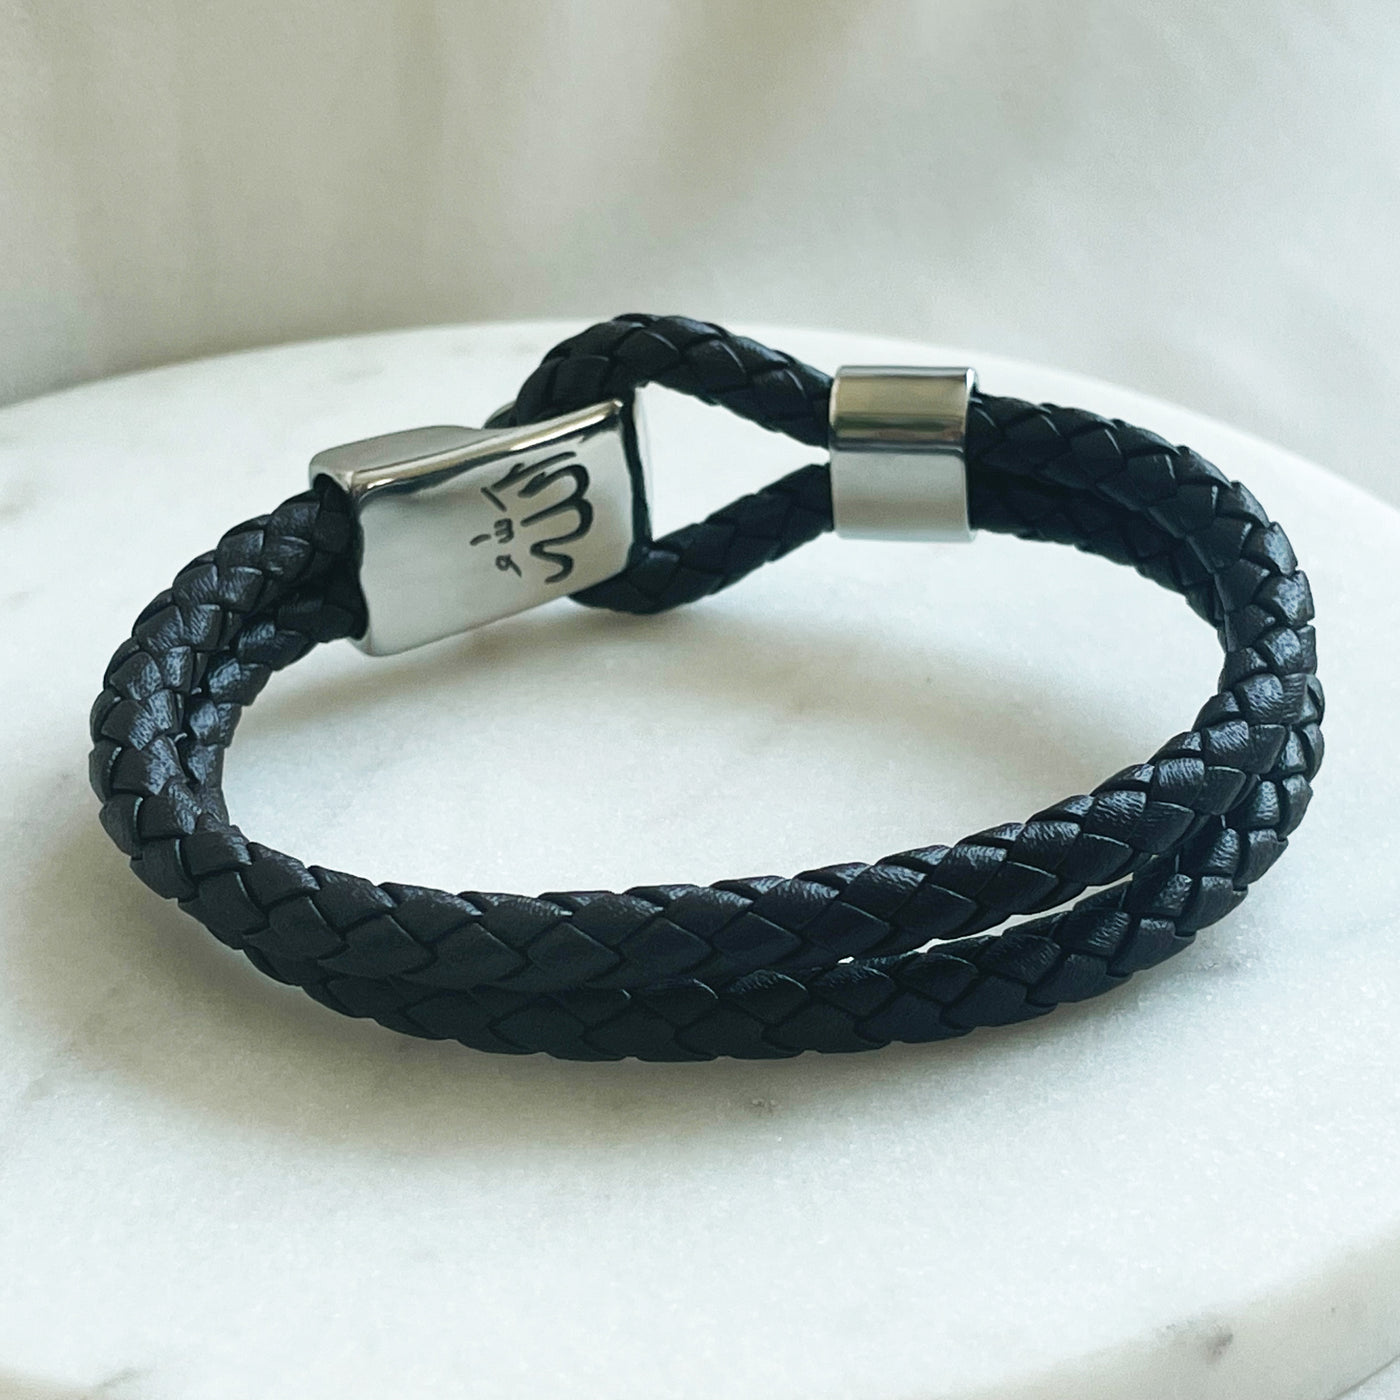 MEN'S PERSONALIZED LEATHER ENGRAVED BRAIDED BRACELET